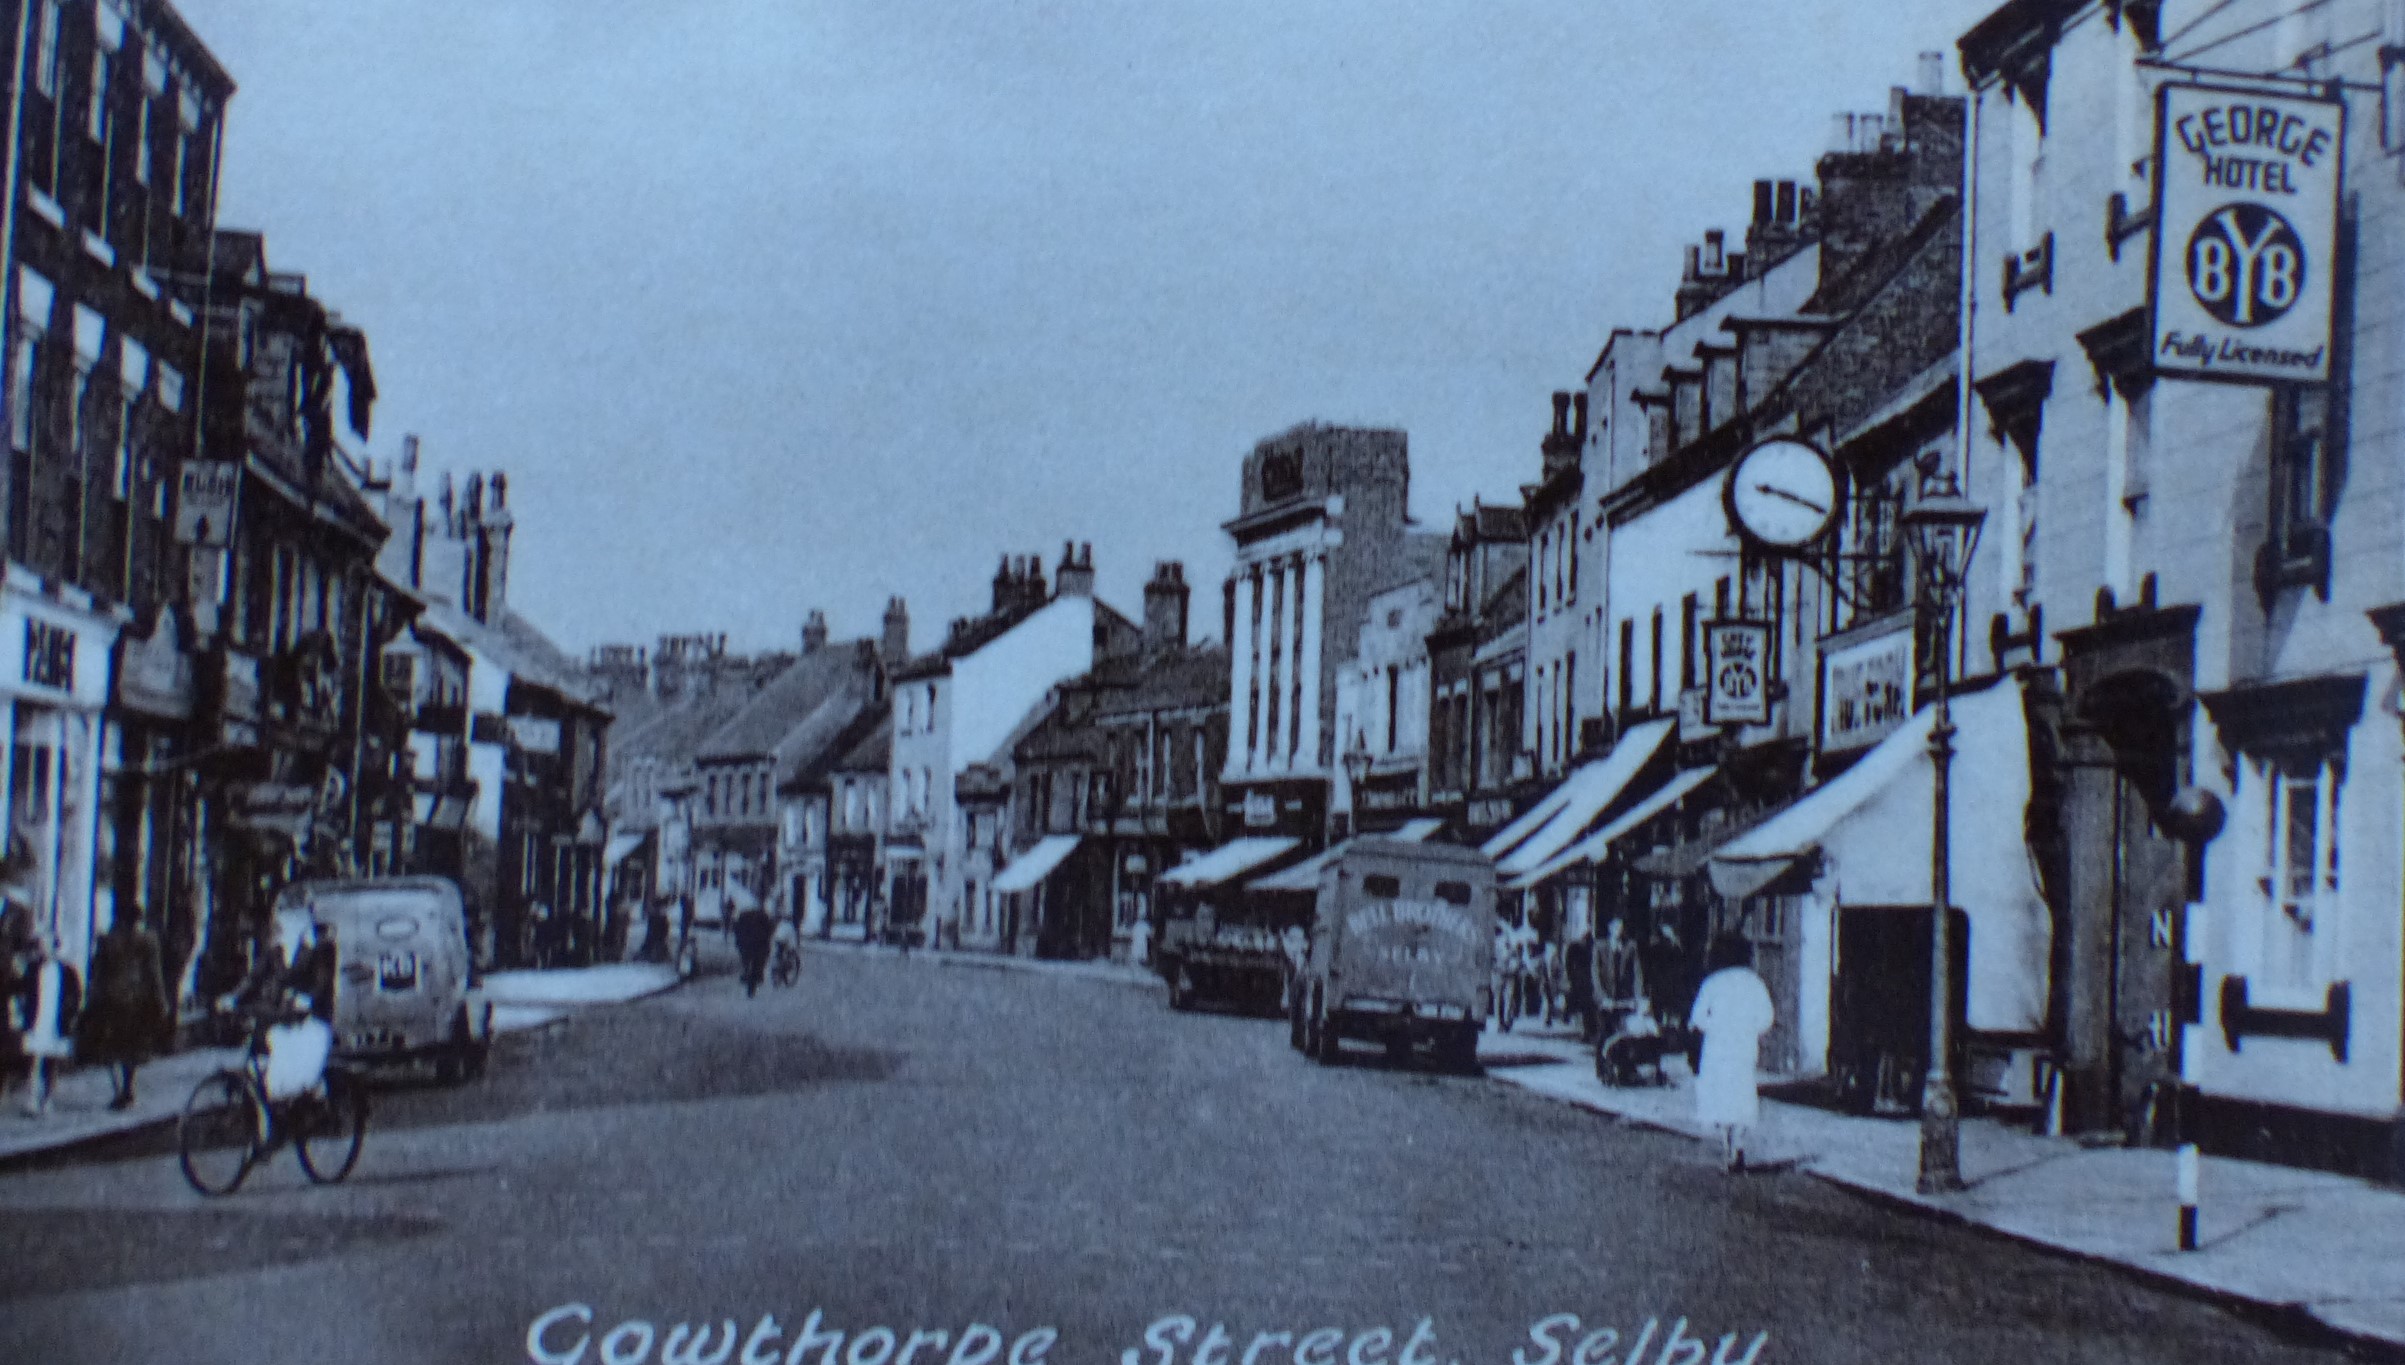 Gowthorpe Selby date unknown